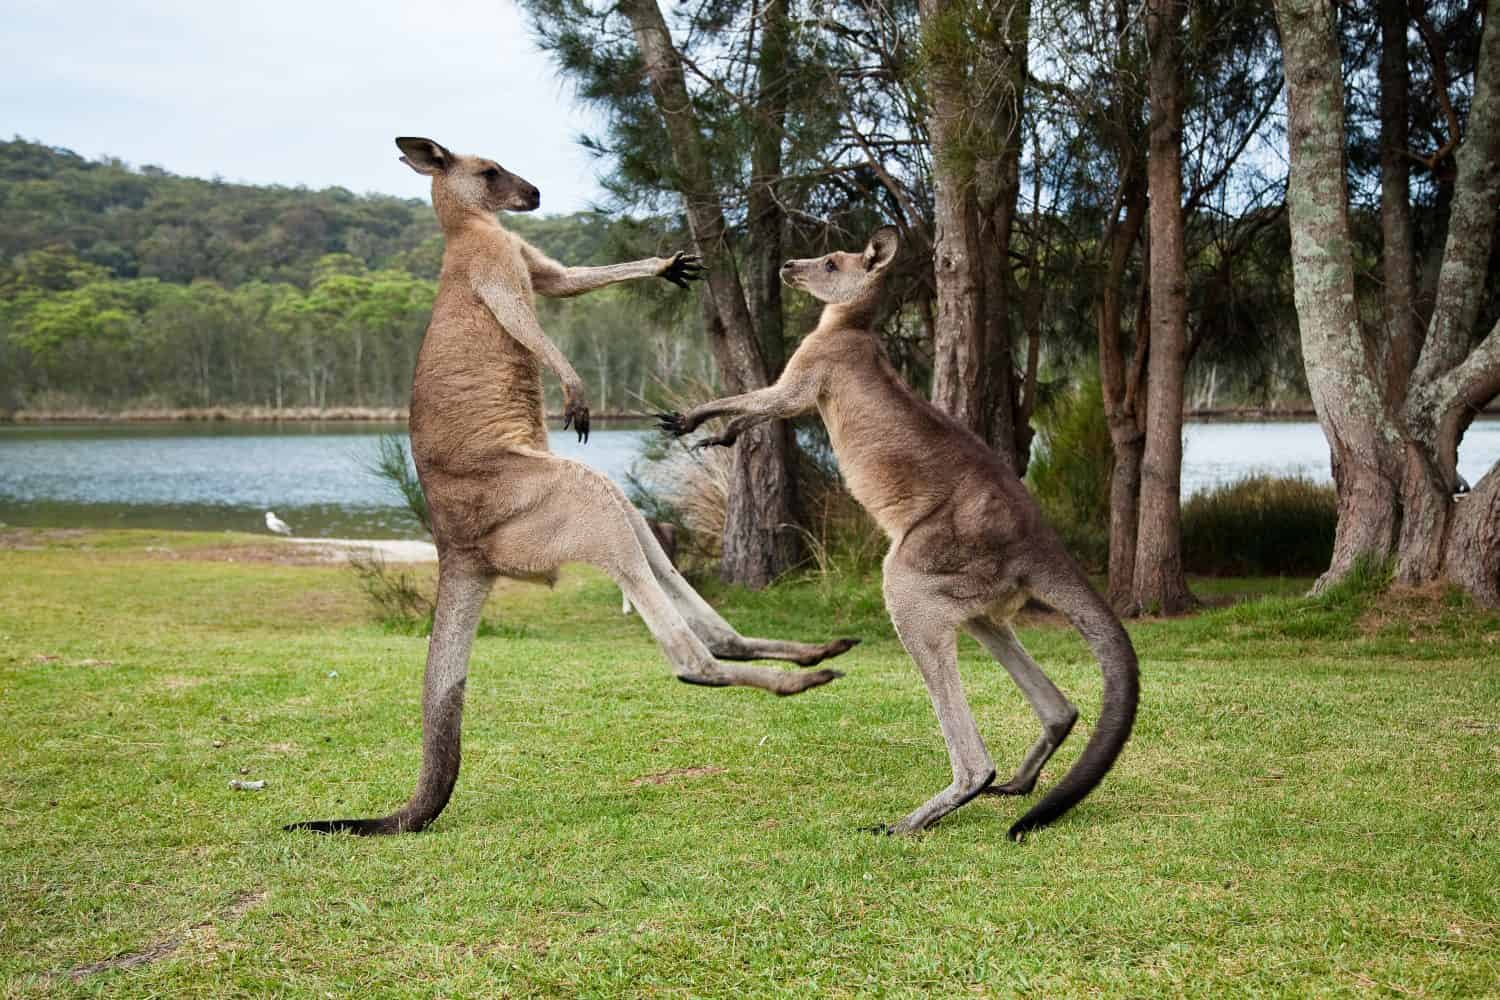 Kangaroo males boxing on the shore of a lake, Kangaroos fighting, kicking each other on green grass with scenic trees and lake view